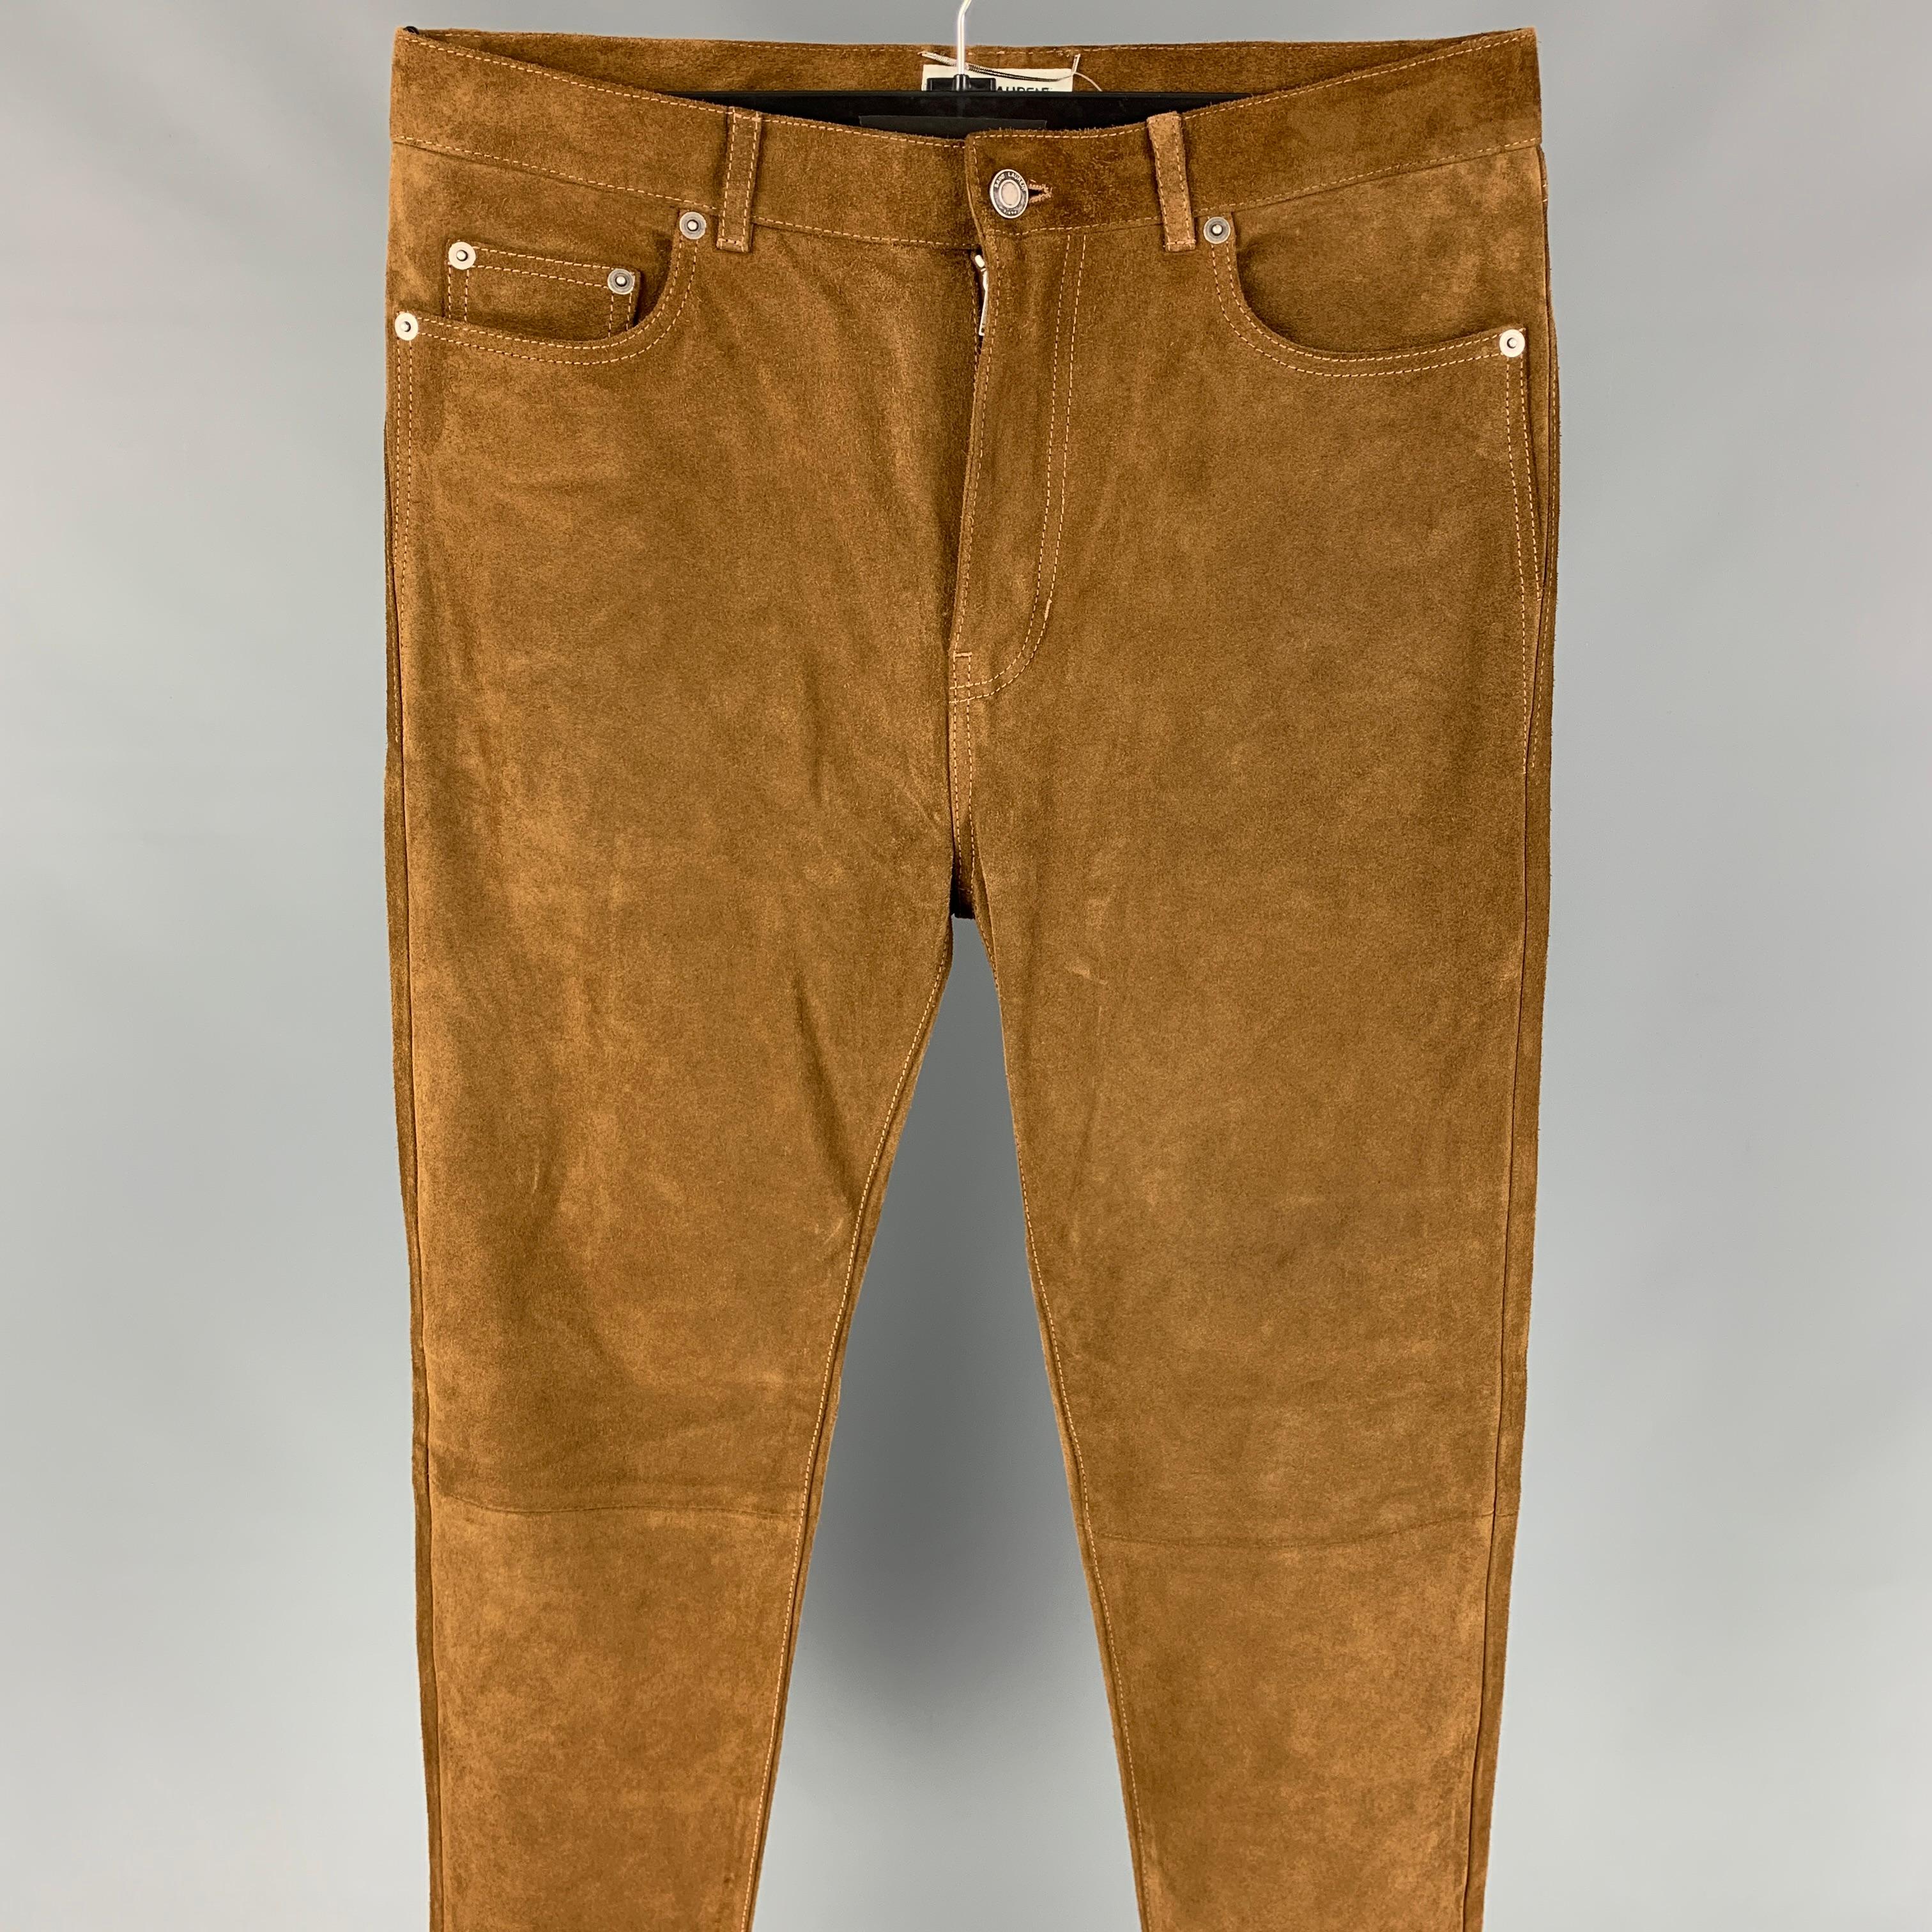 SAINT LAURENT casual pants comes in a brown & tan suede with silk lining featuring a slim fit, contrast stitching, and a zip fly closure. Made in Italy. 

Excellent Pre-Owned Condition.
Marked: 46
Original Retail Price: